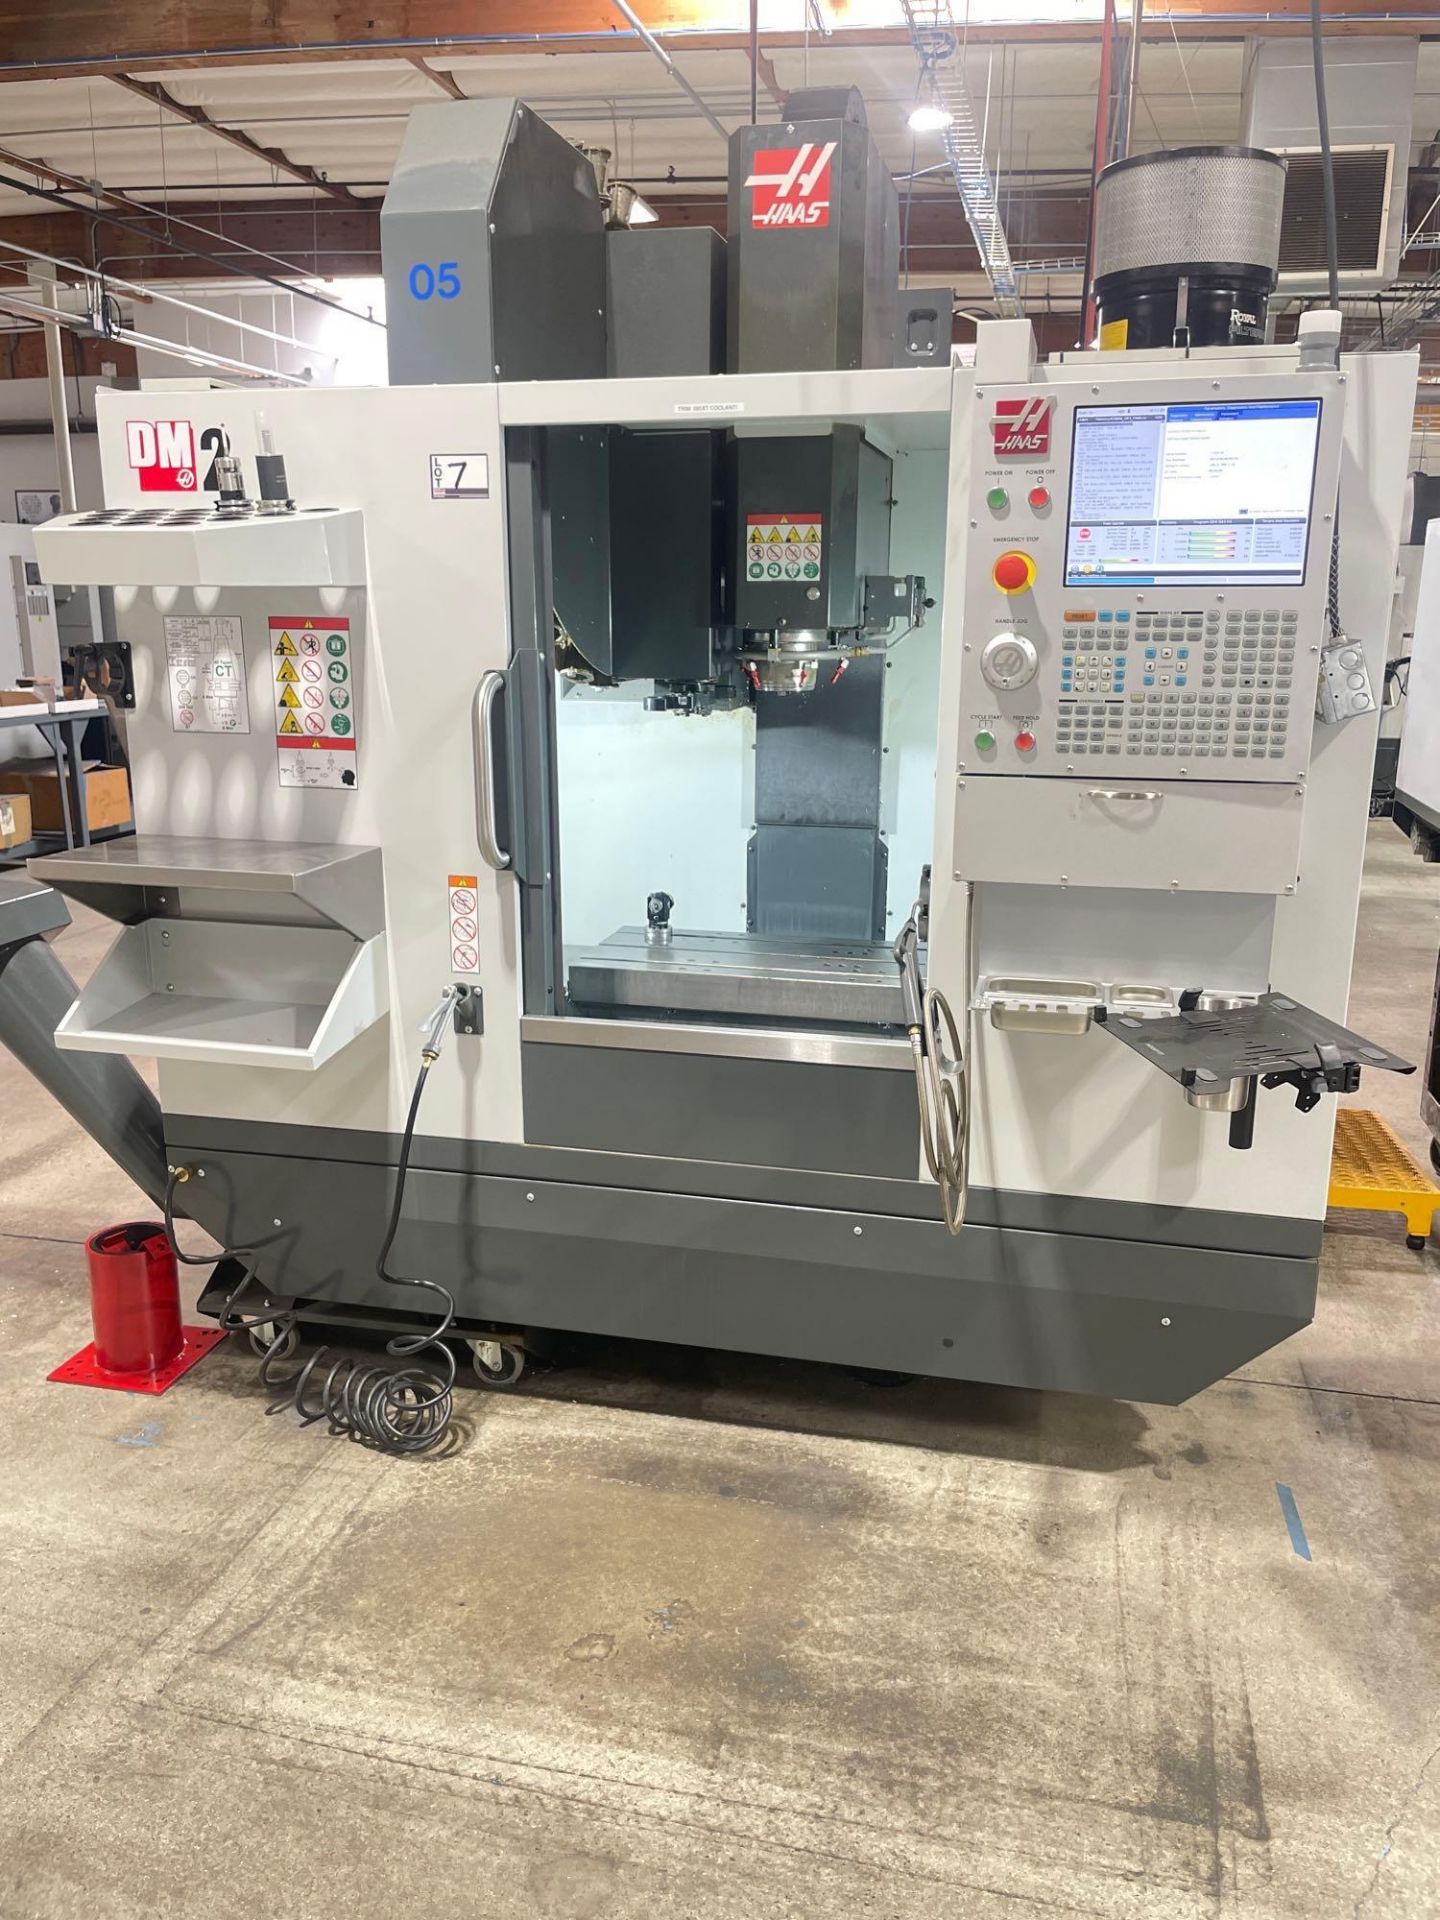 Haas DM-2, 28” x 16” x 15.5” Travels, CT 40, 18+1 SMTC, CTS, WIPS, as New as 2021 - Image 2 of 13